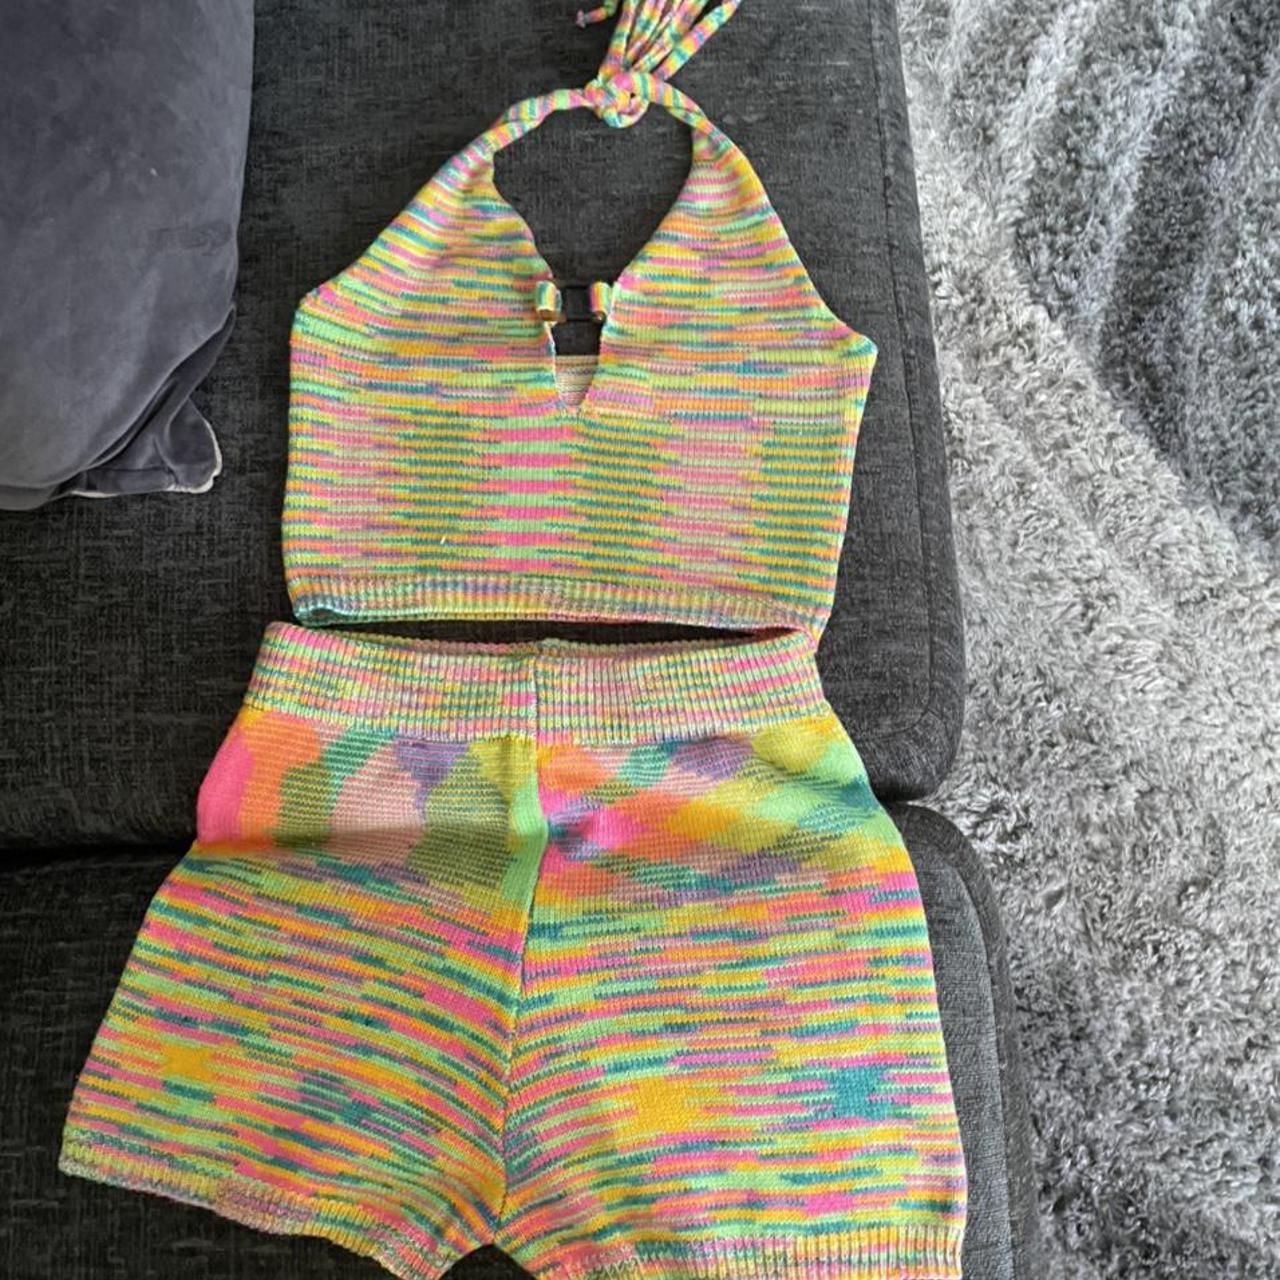 She Has Evolved Sunrise 2 Piece Set Worn Once To A Depop